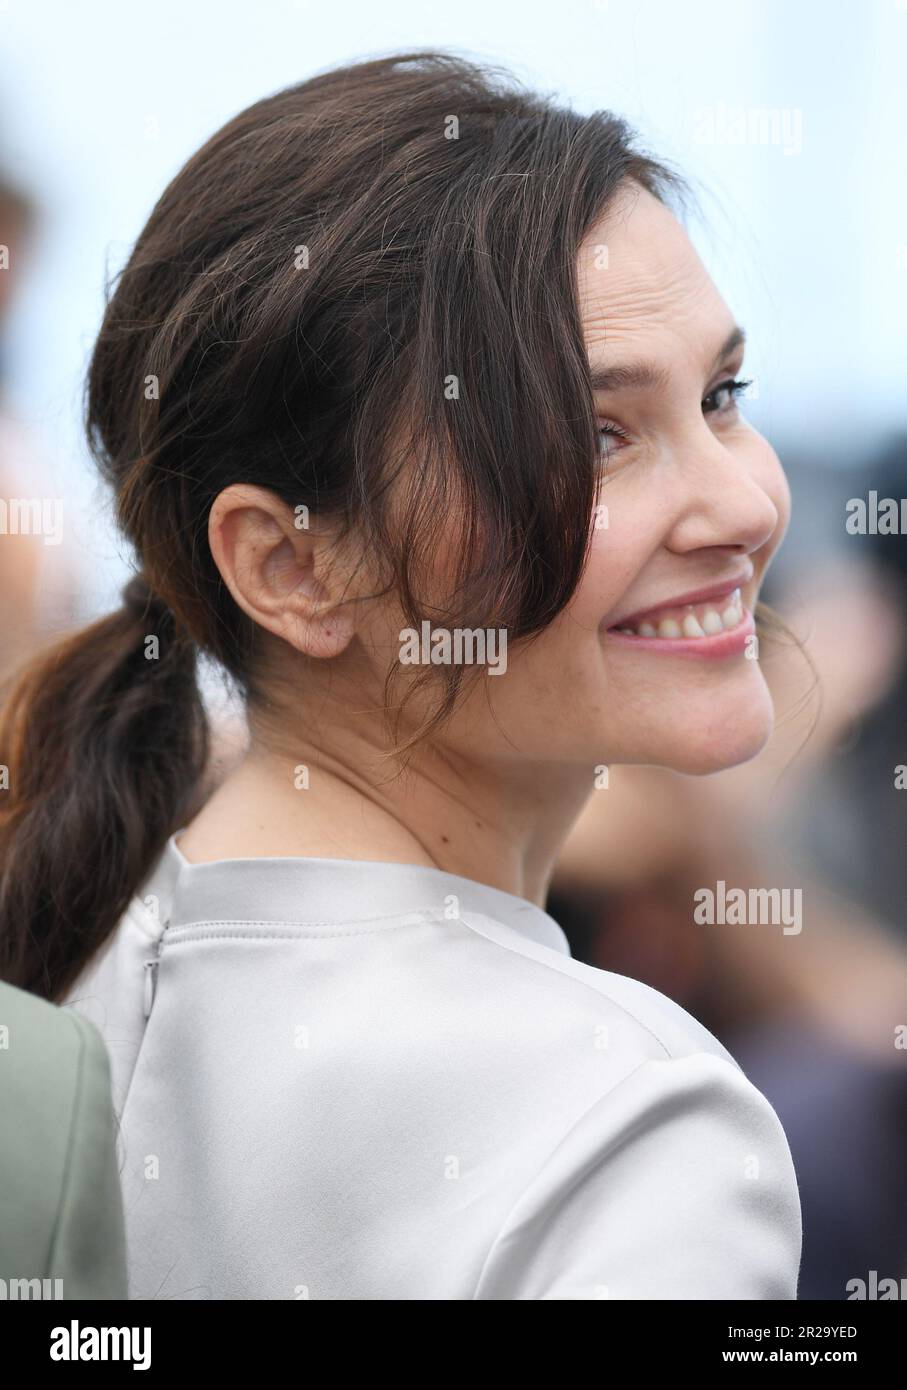 Cannes, France. 18th May, 2023. French actress Virginie Ledoyen attends a photo call for Homecoming at the 76th Cannes Film Festival at Palais des Festivals in Cannes, France on Thursday, May 18, 2023. Photo by Rune Hellestad/ Credit: UPI/Alamy Live News Stock Photo